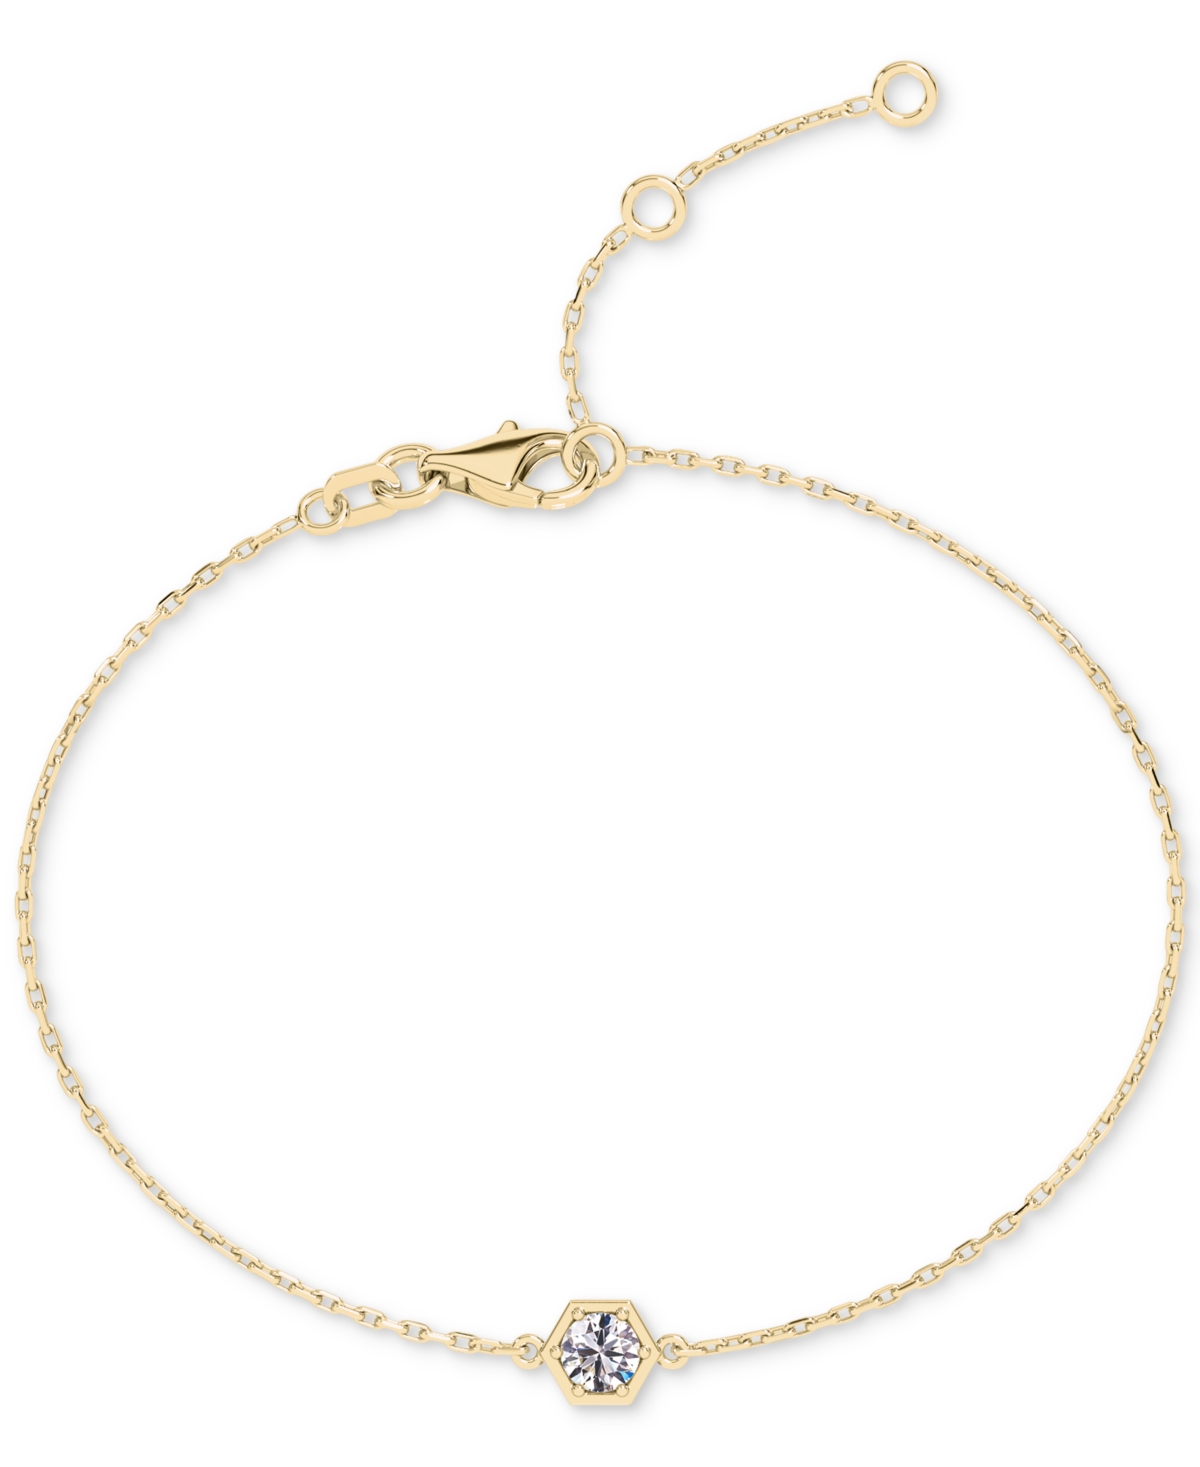 Portfolio by De Beers Forevermark Diamond Honeycomb Solitaire Chain Bracelet (1/5 ct. t.w.) in 14k White or Yellow Gold - White Gold